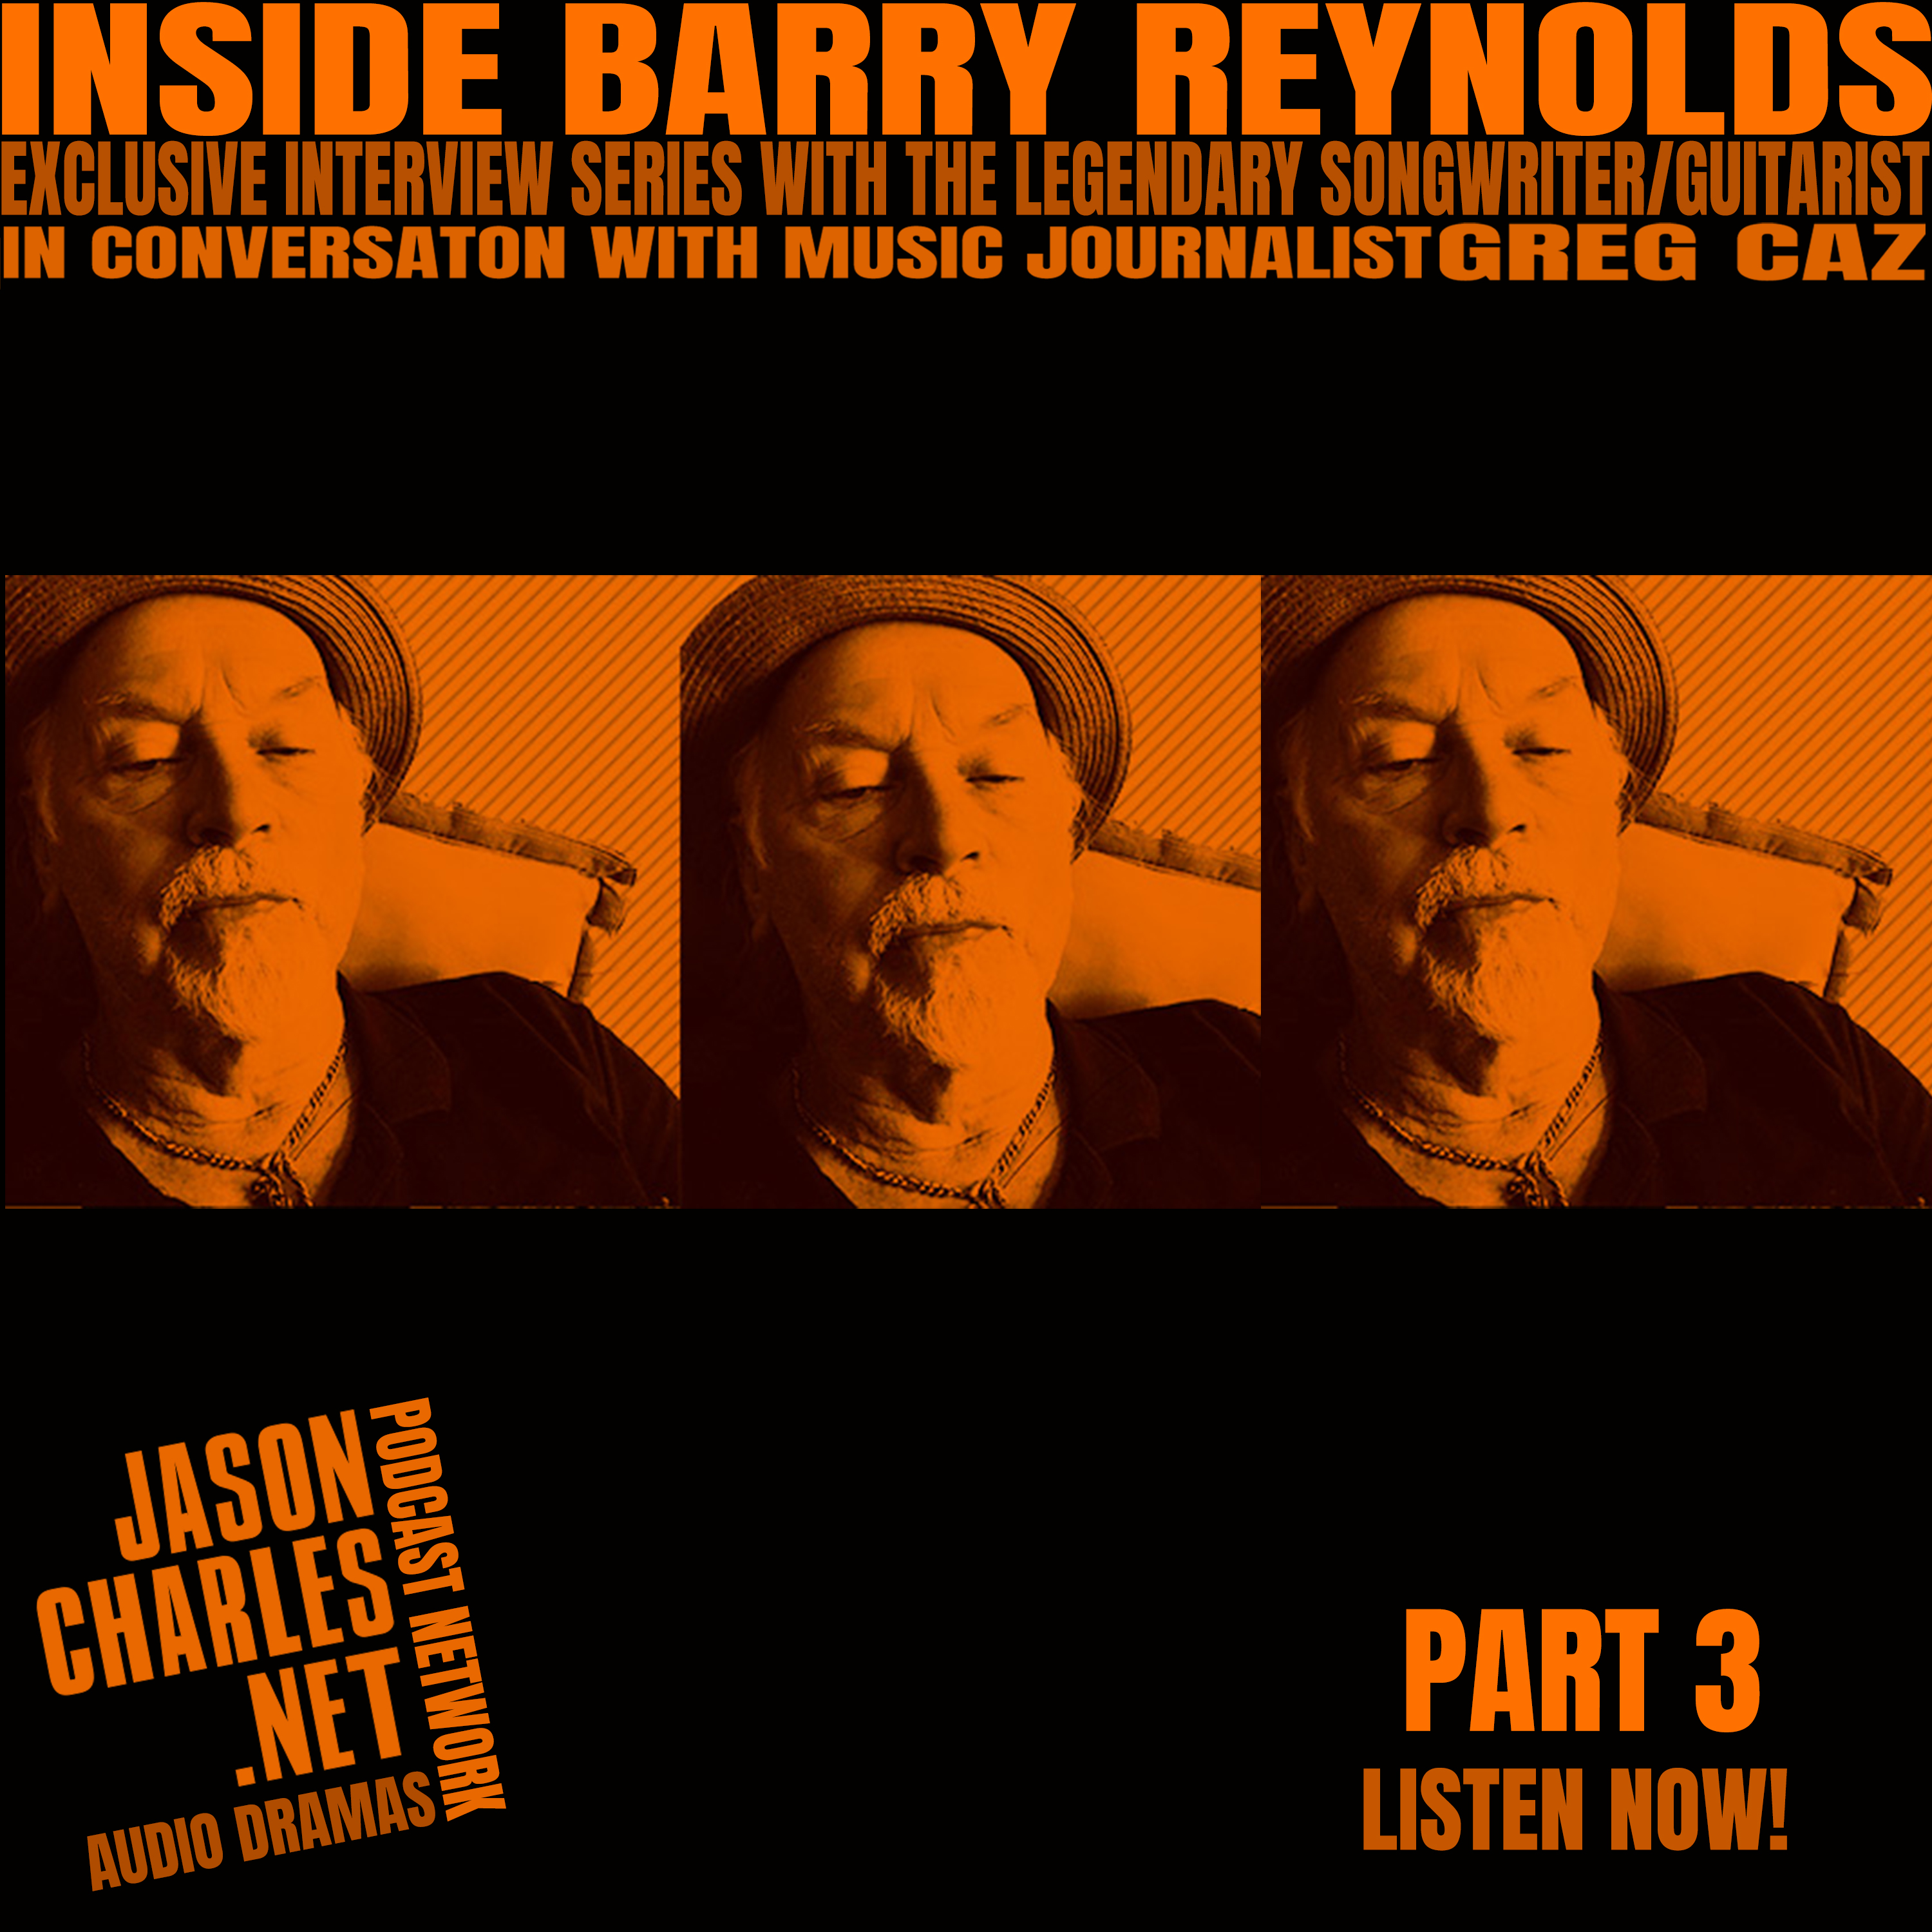 INSIDE BARRY REYNOLDS Part 3 Nassau to New York to Now